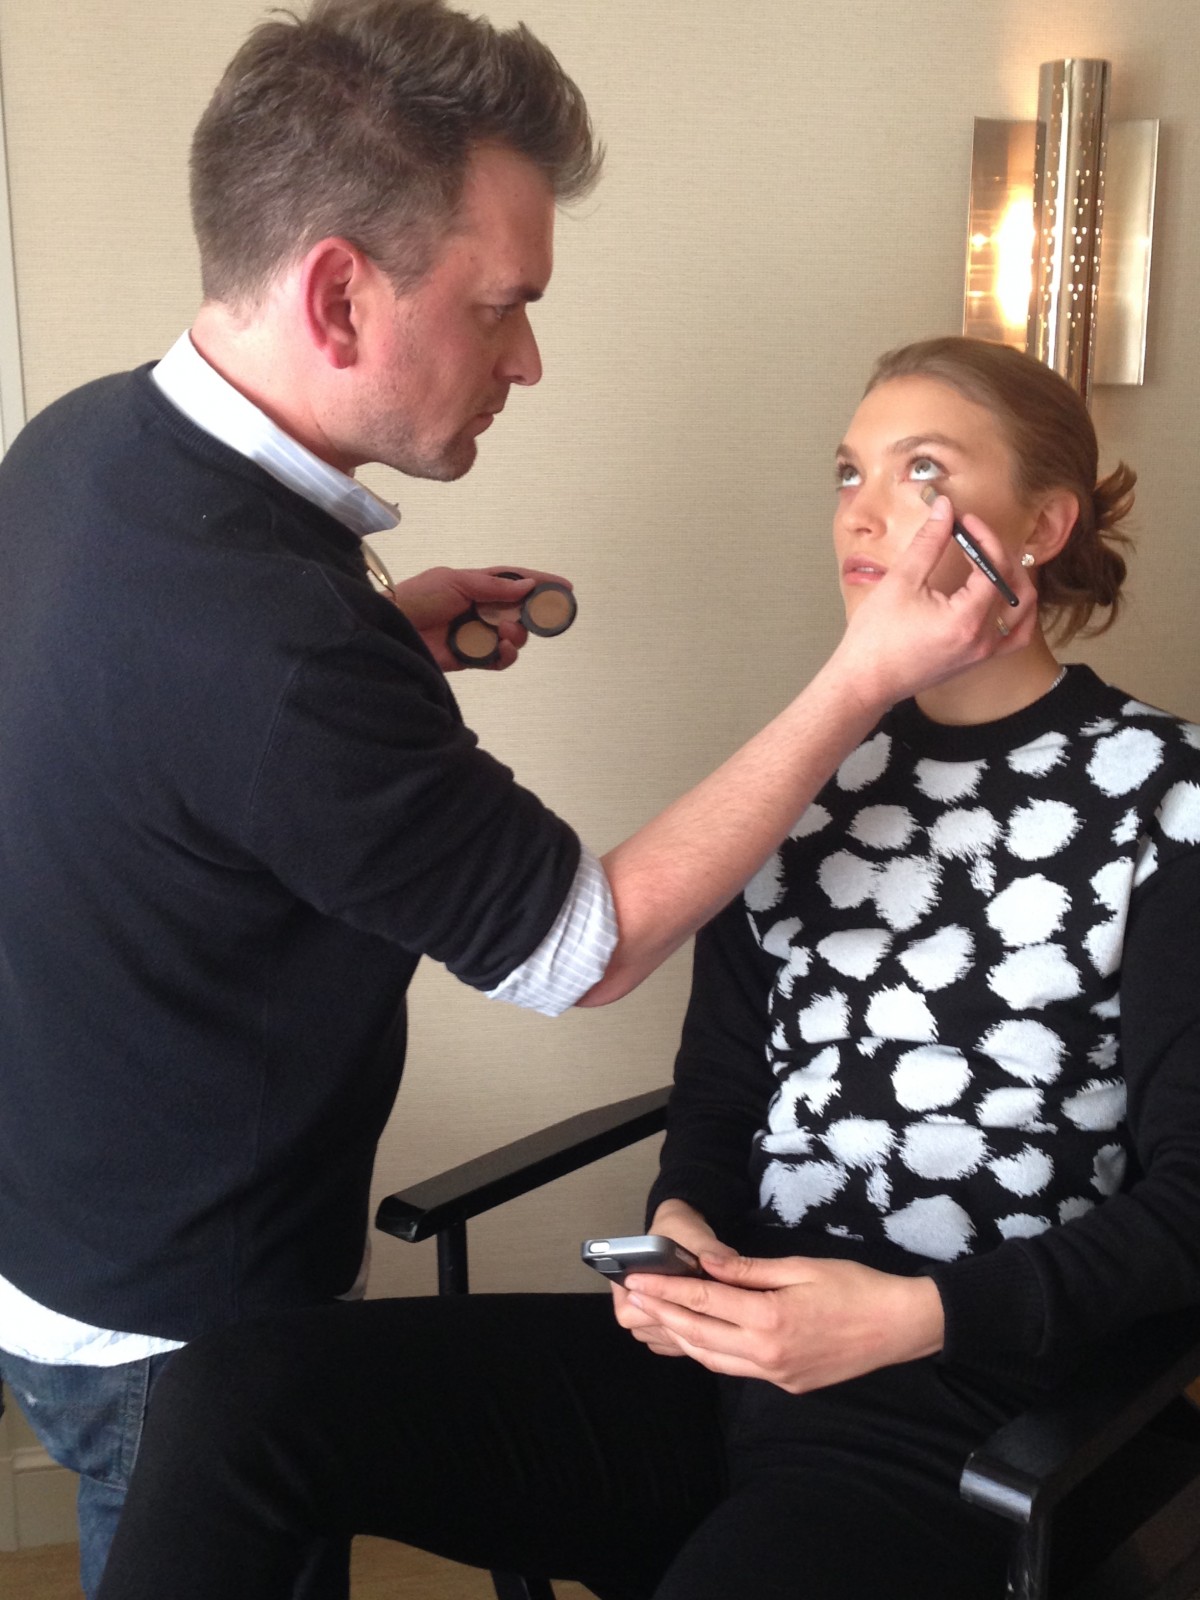 EXCLUSIVE: Q&A With Arizona Muse + Her MET Ball 2014 Makeup, Hair & Nails